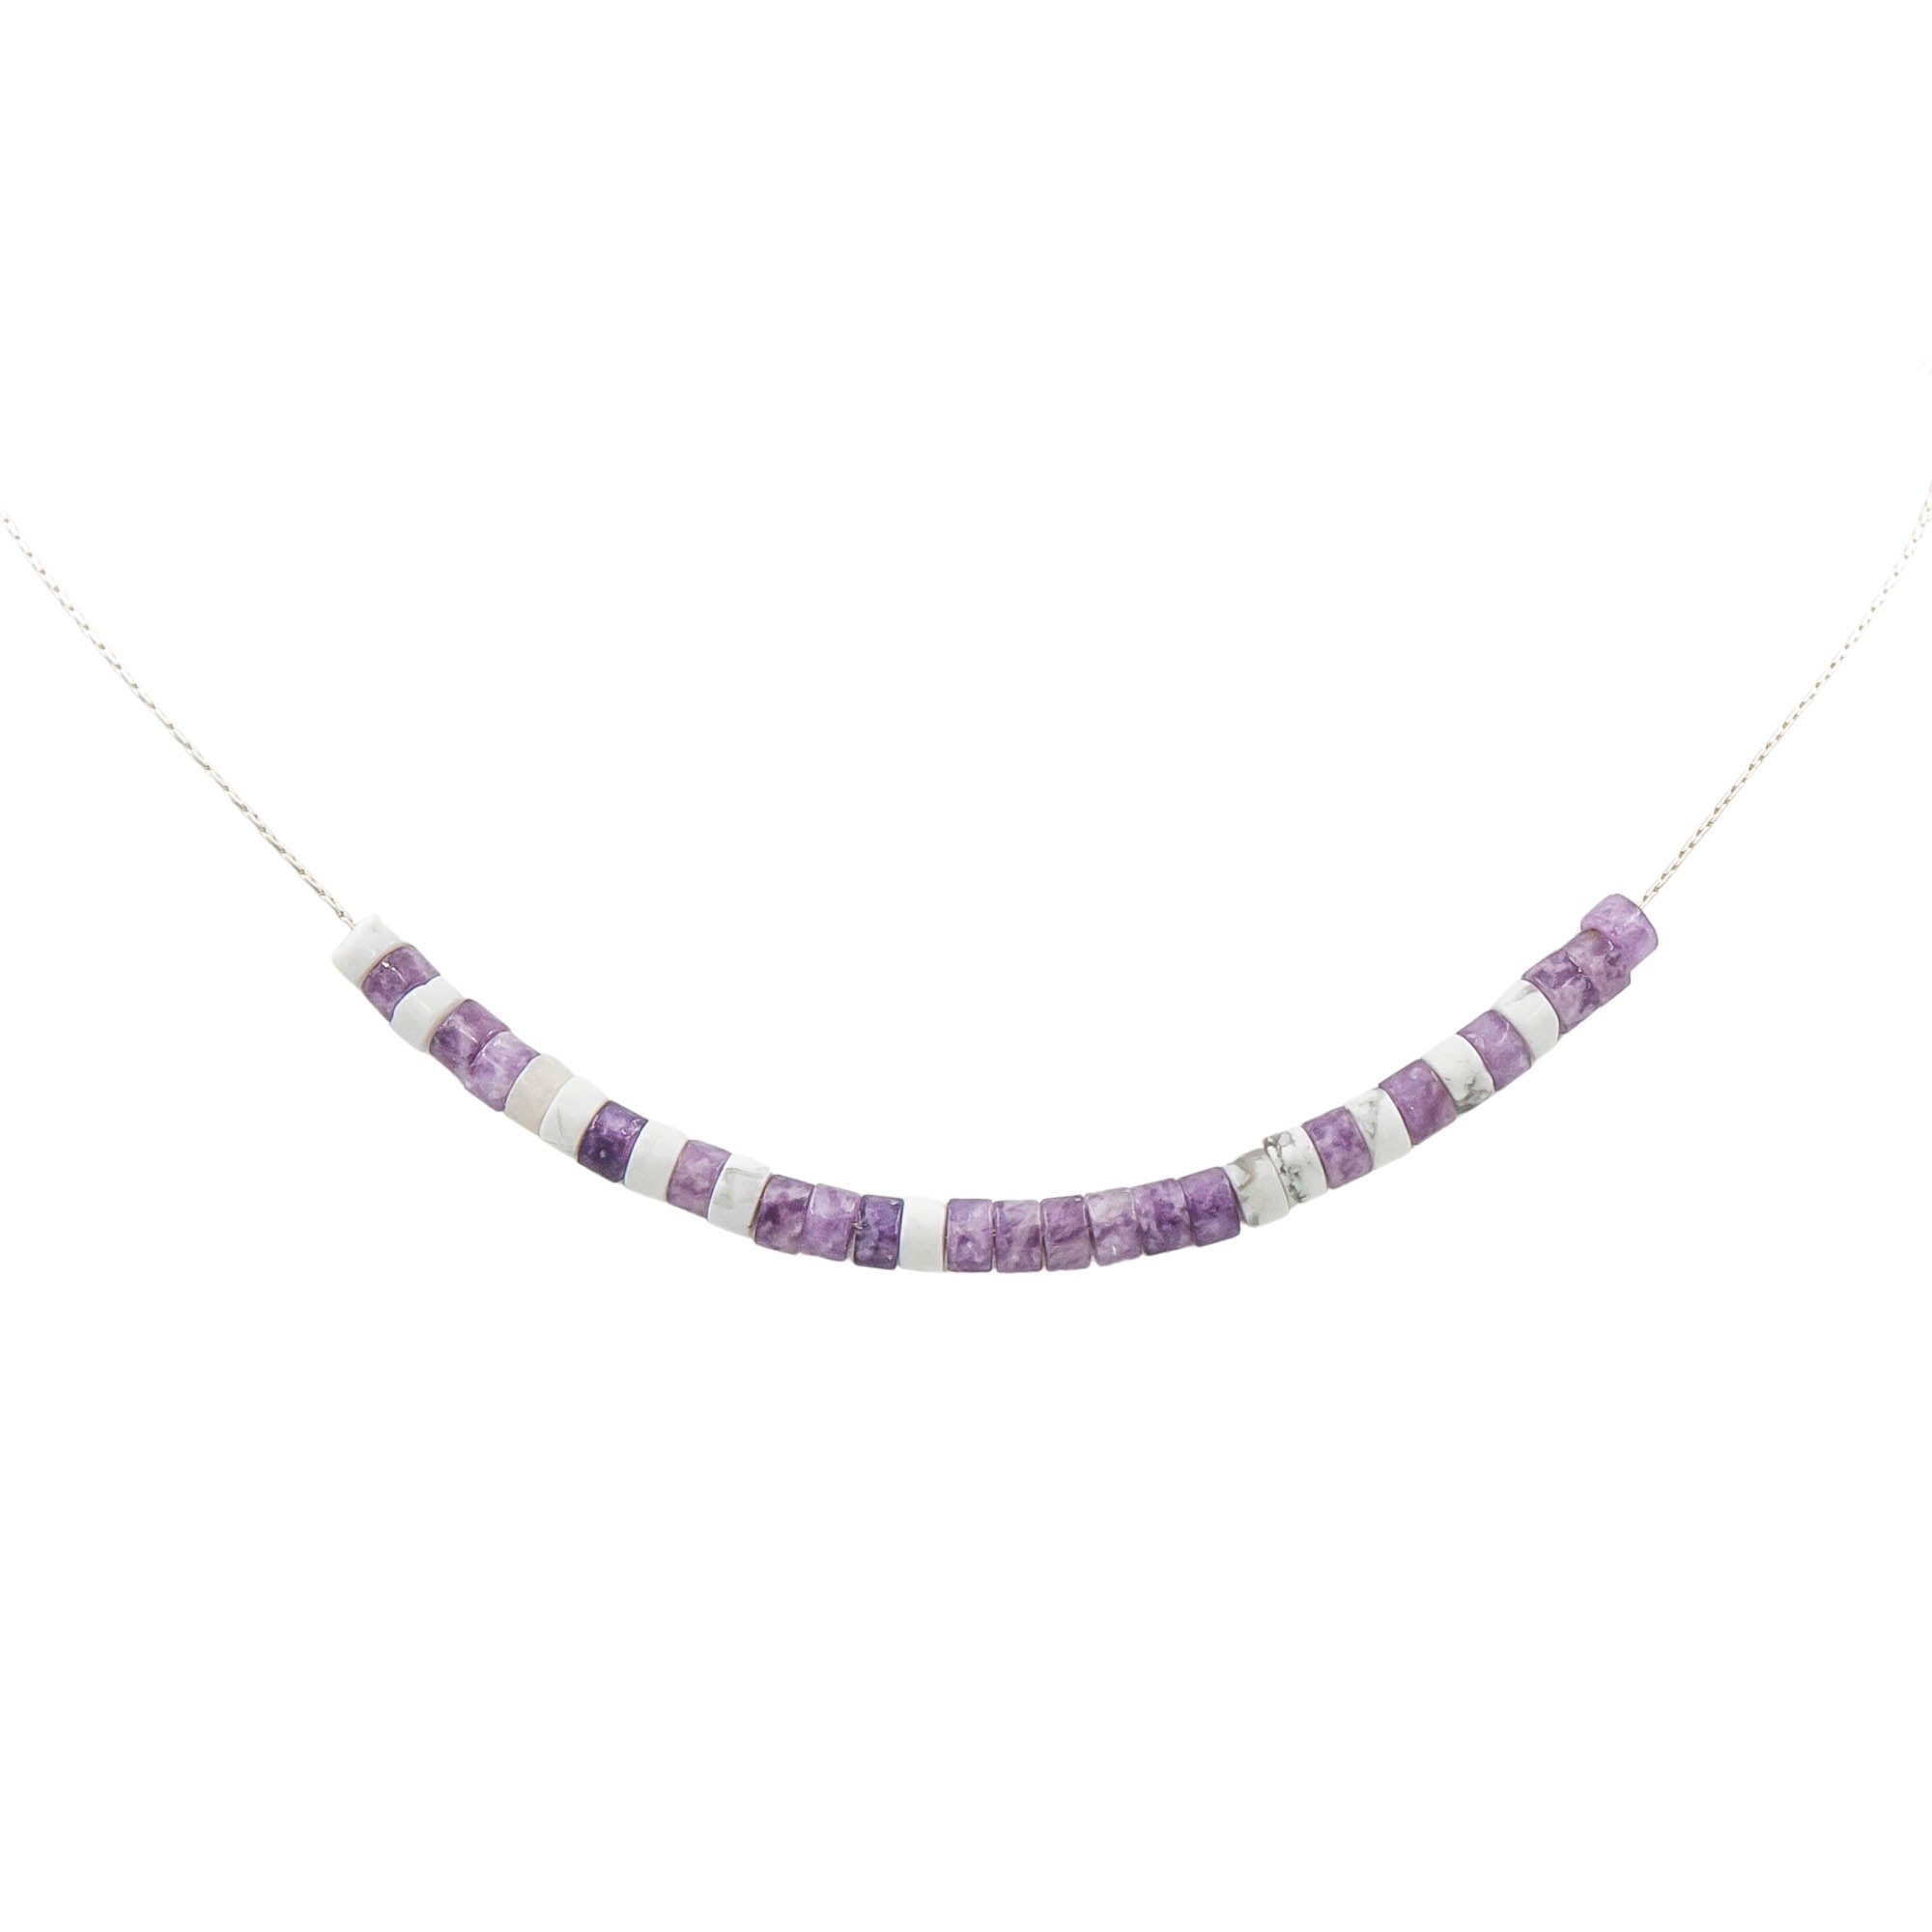 Morse Code Necklace in 14k Gold Fill – Violet and Mable